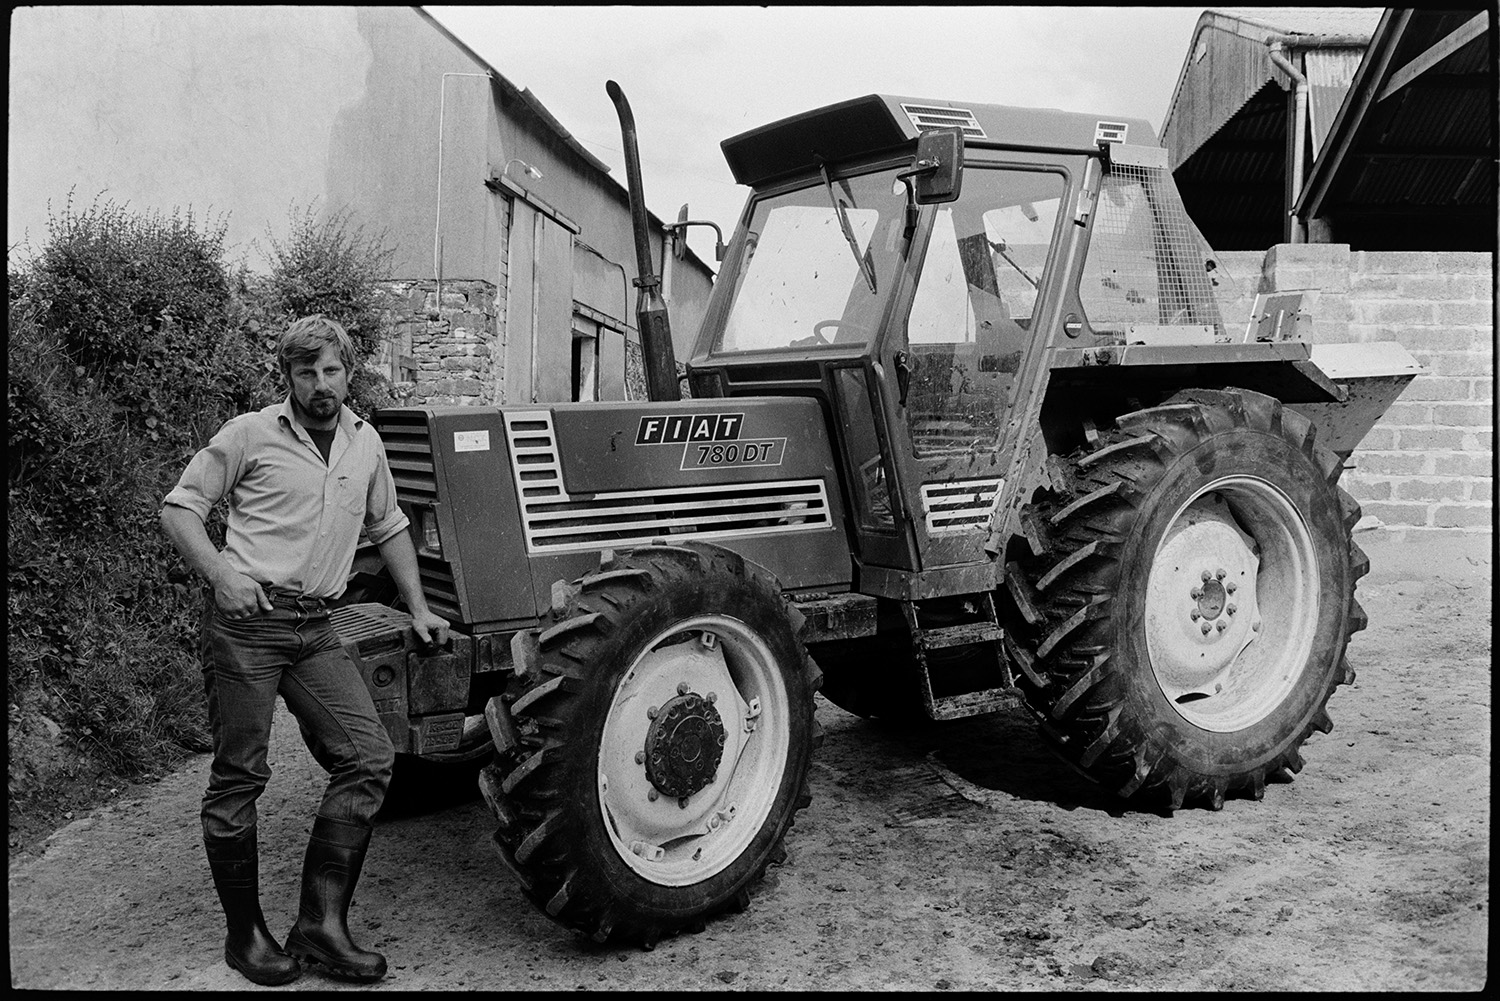 Farmer standing with tractor.
[Simon Berry standing next to a Fiat tractor in a farmyard at Harepath, Beaford. Barns are visible in the background.]